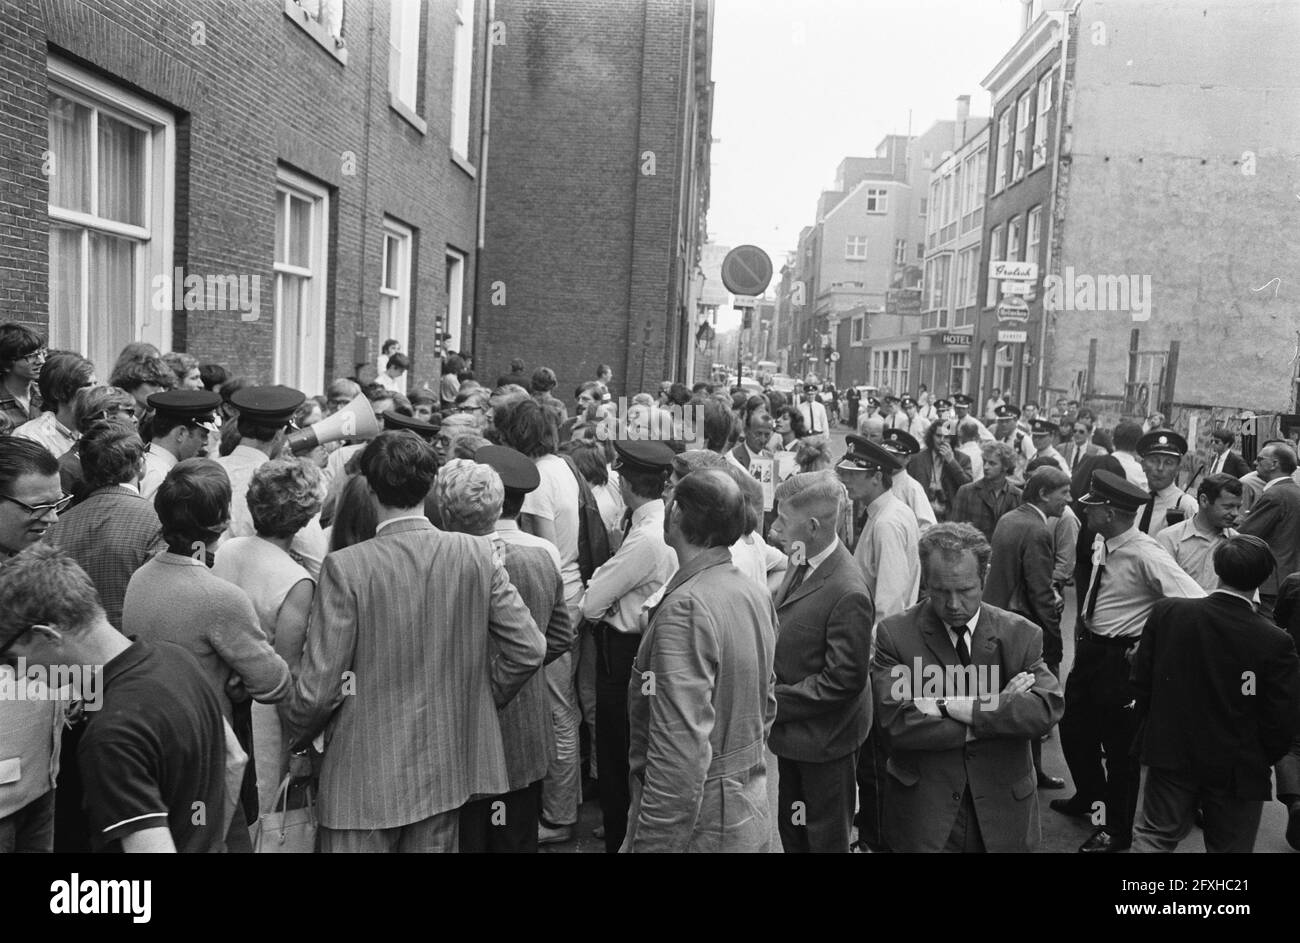 In front of courthouse, where Maagdenhuis occupiers are being tried, Amsterdam, singing Rikkert Zuiderveld and Elly Nieman, June 16, 1969, occupiers, courthouses, The Netherlands, 20th century press agency photo, news to remember, documentary, historic photography 1945-1990, visual stories, human history of the Twentieth Century, capturing moments in time Stock Photo